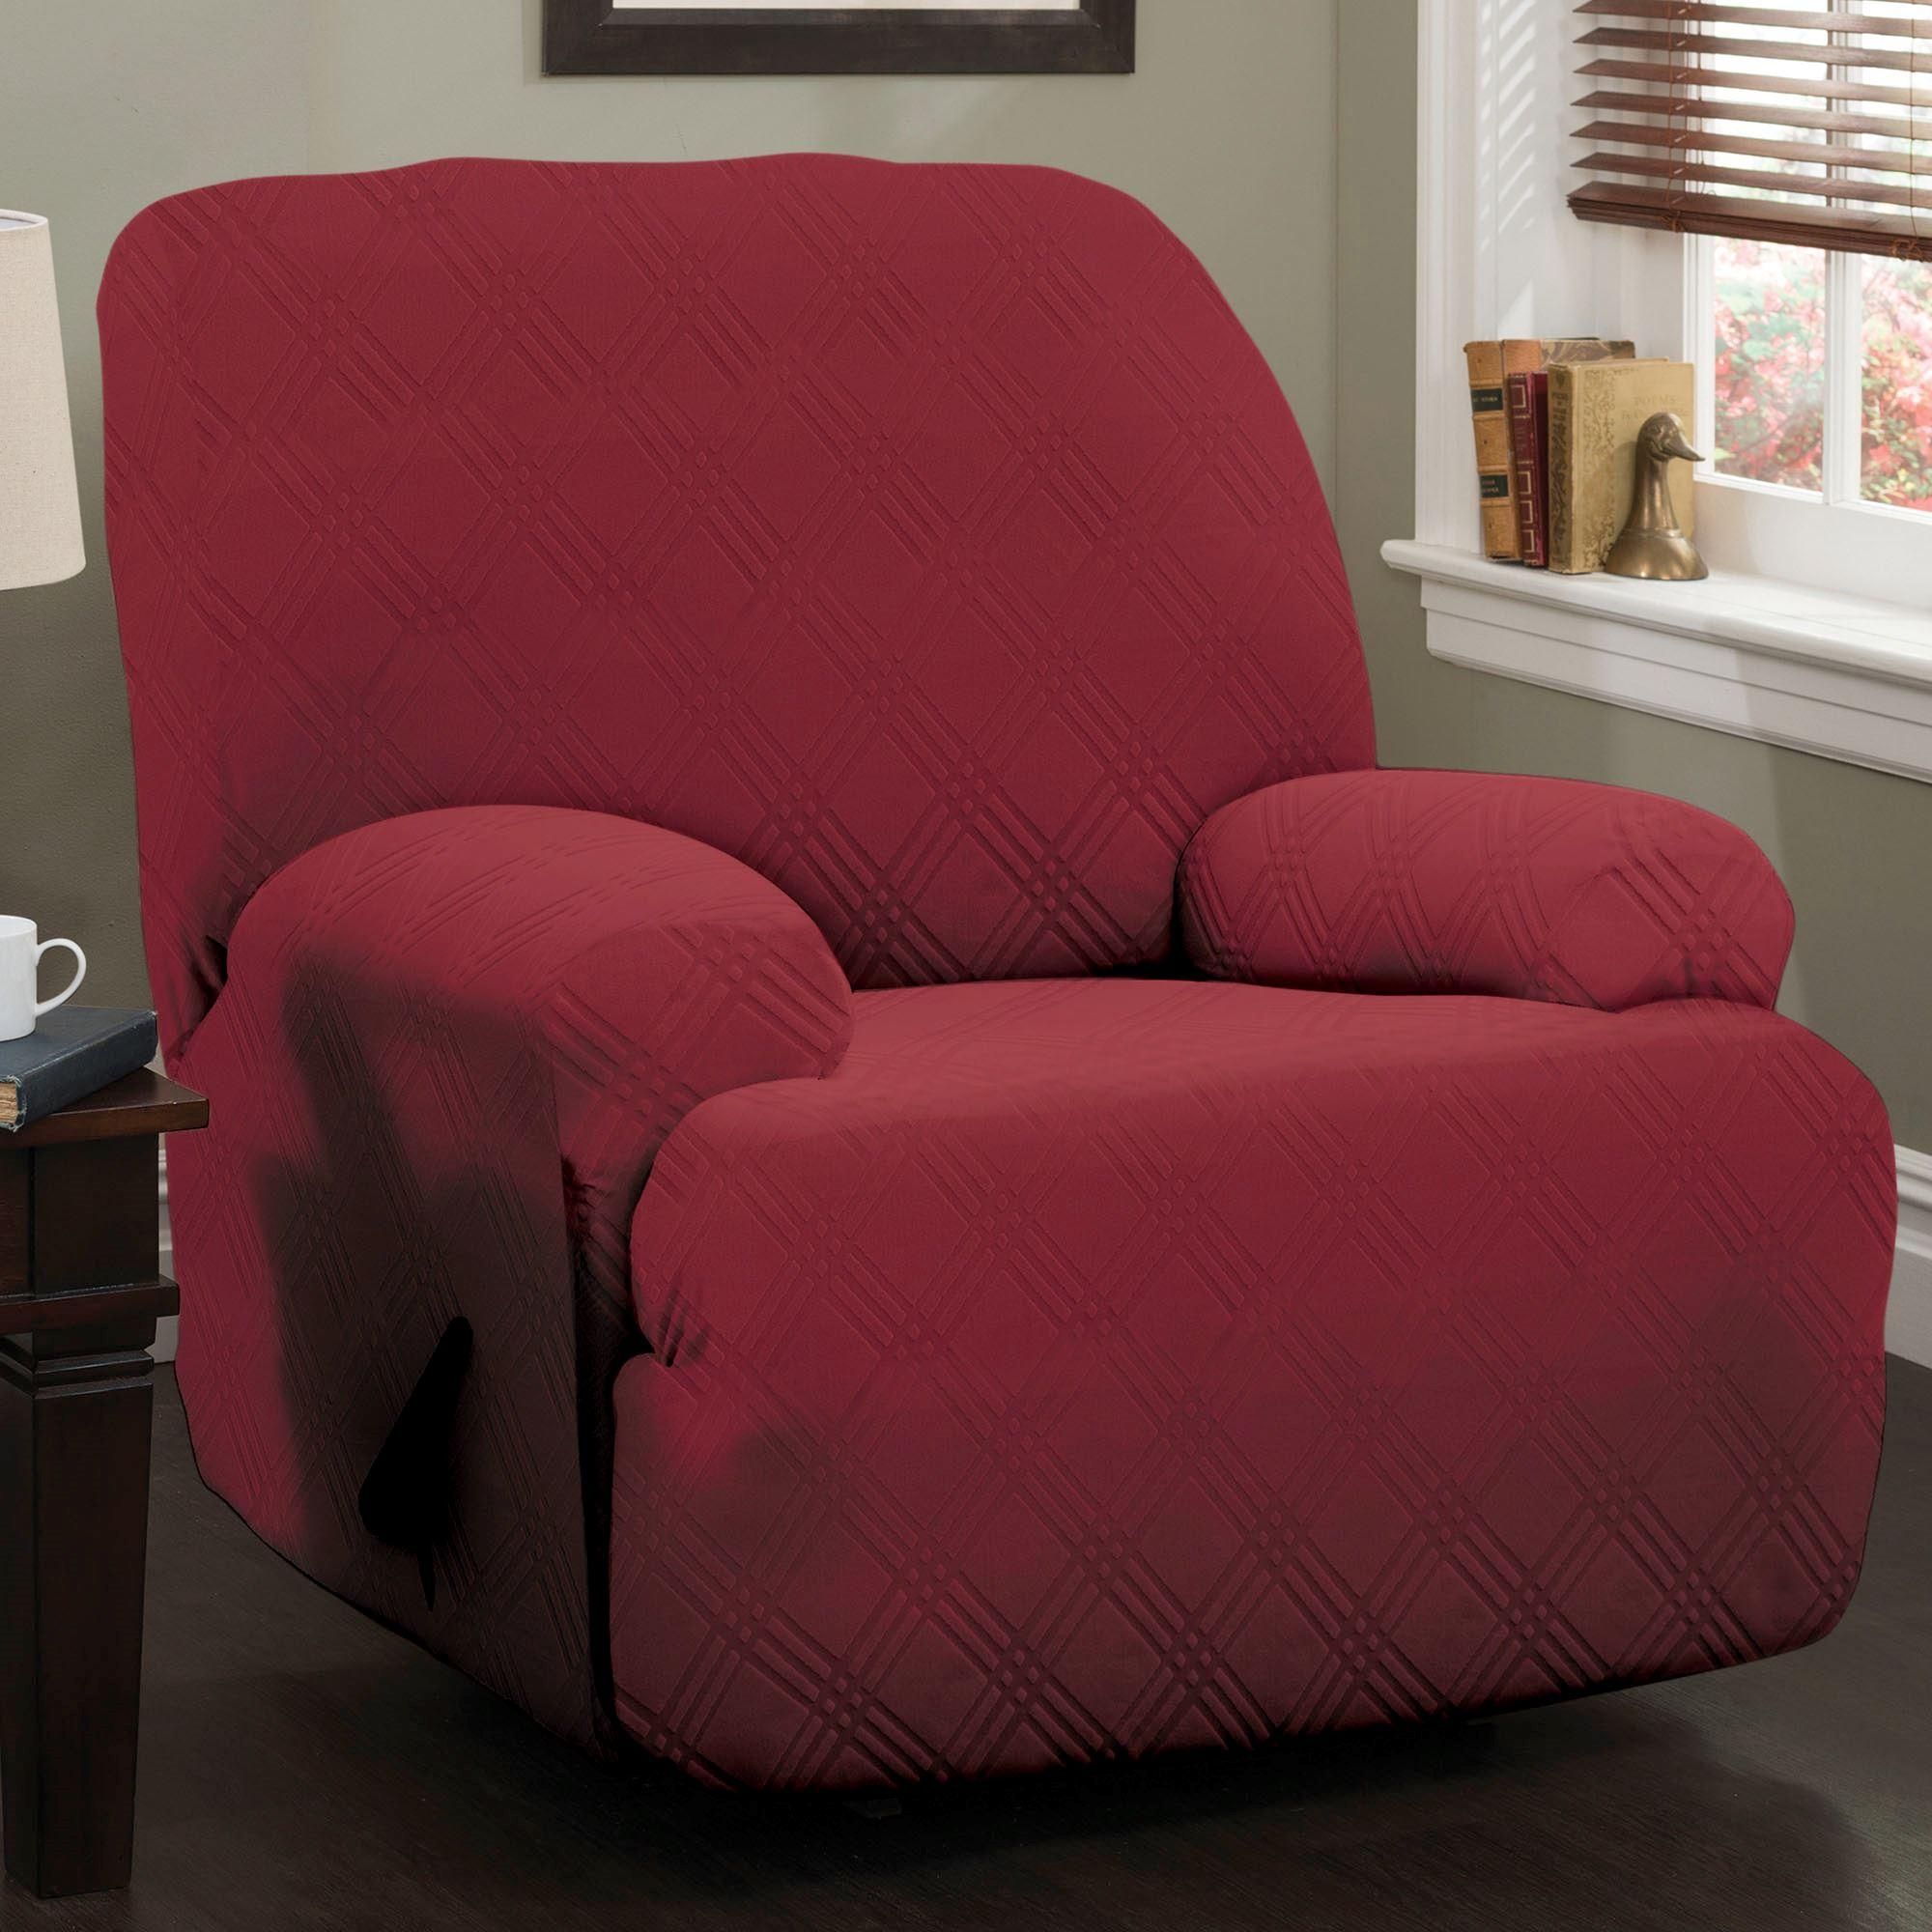 Double Diamond Stretch Jumbo Recliner Slipcovers Throughout Stretch Covers For Recliners (View 4 of 20)